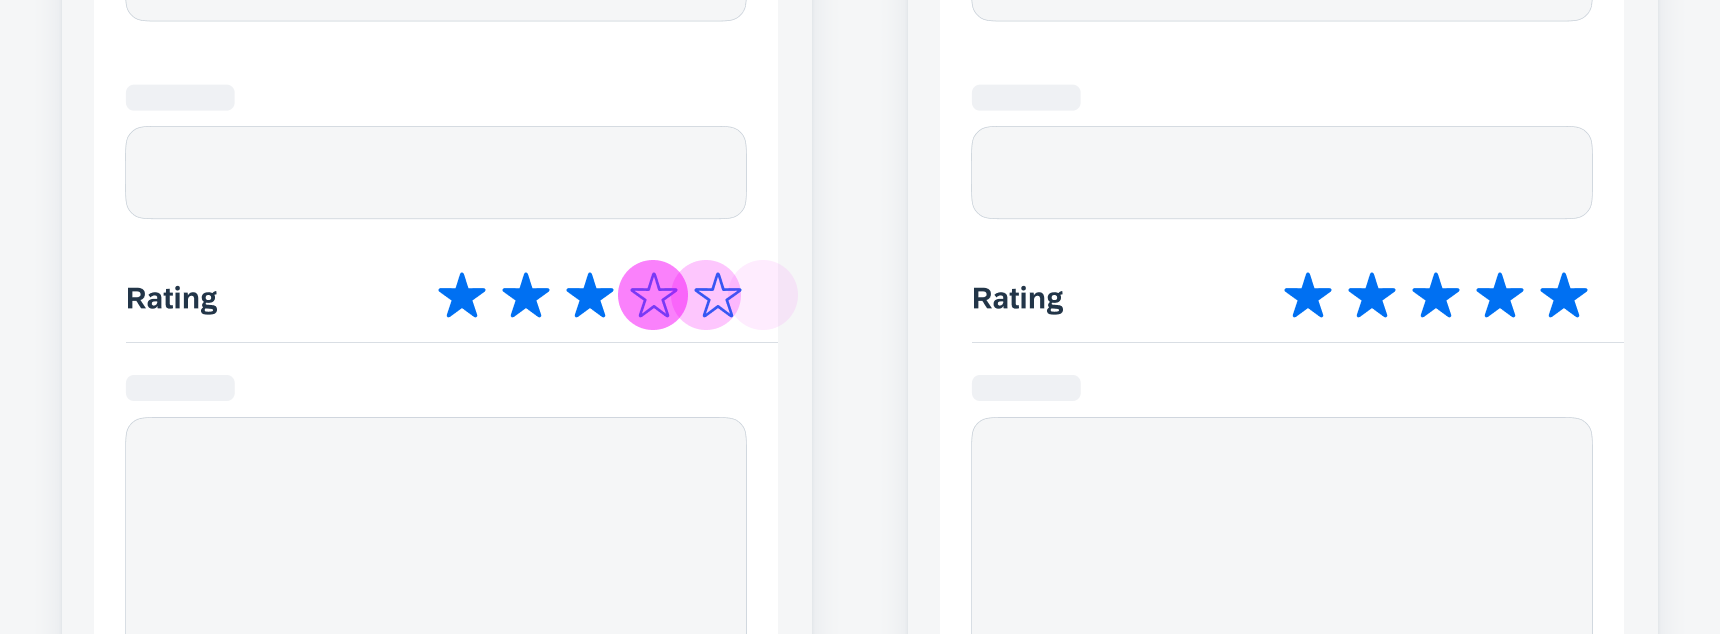 Drag to choose the desired rating